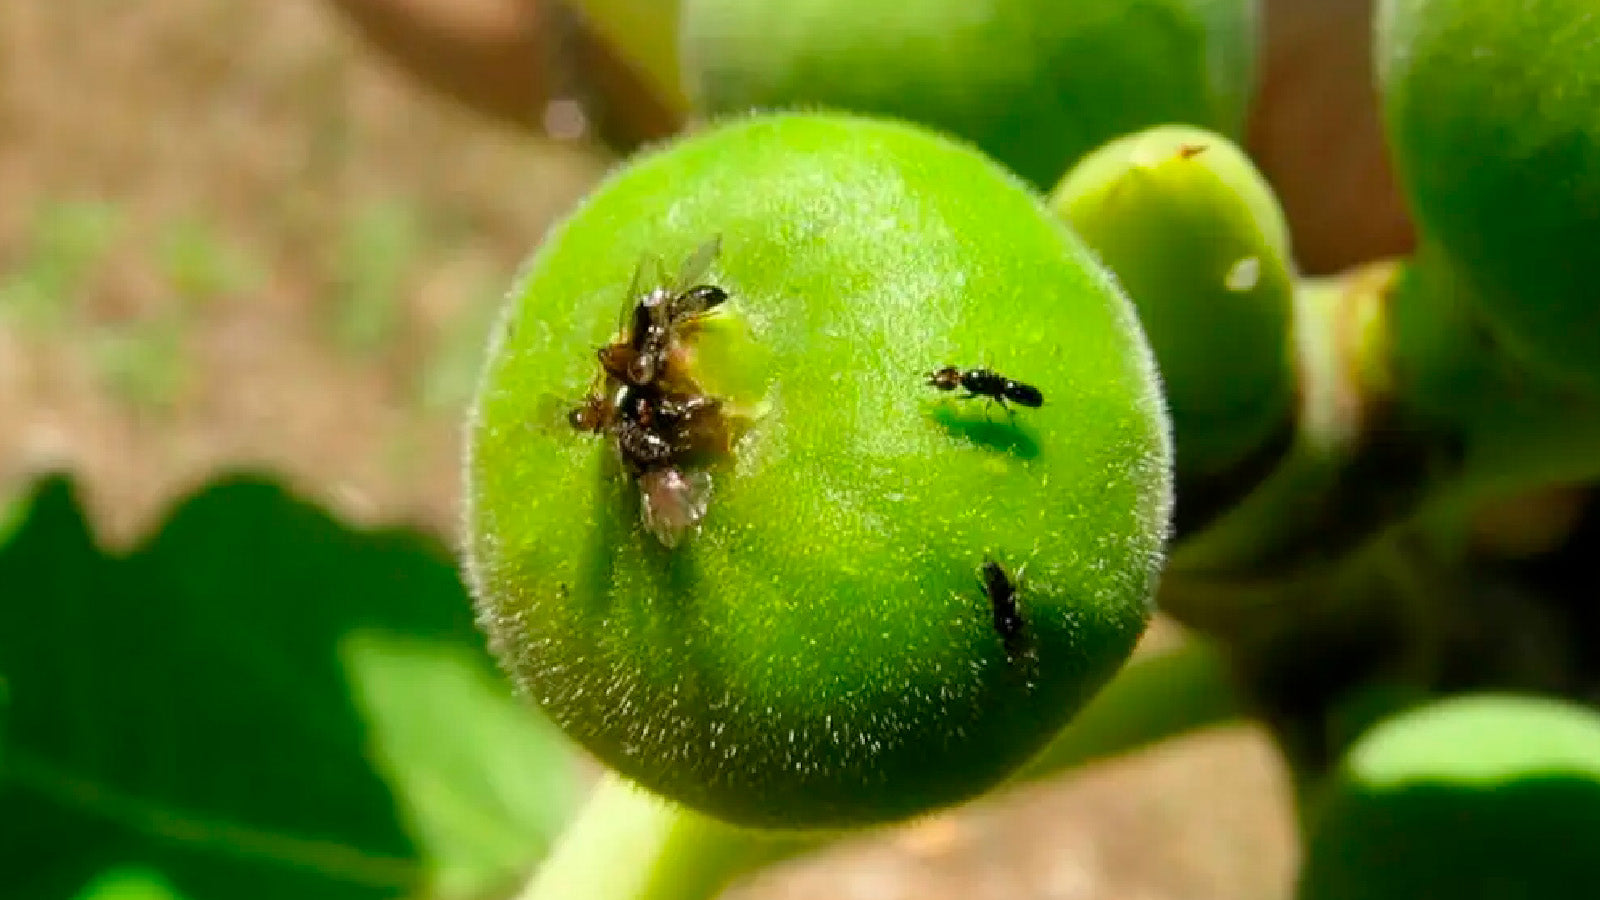 Figs and Fig Wasps